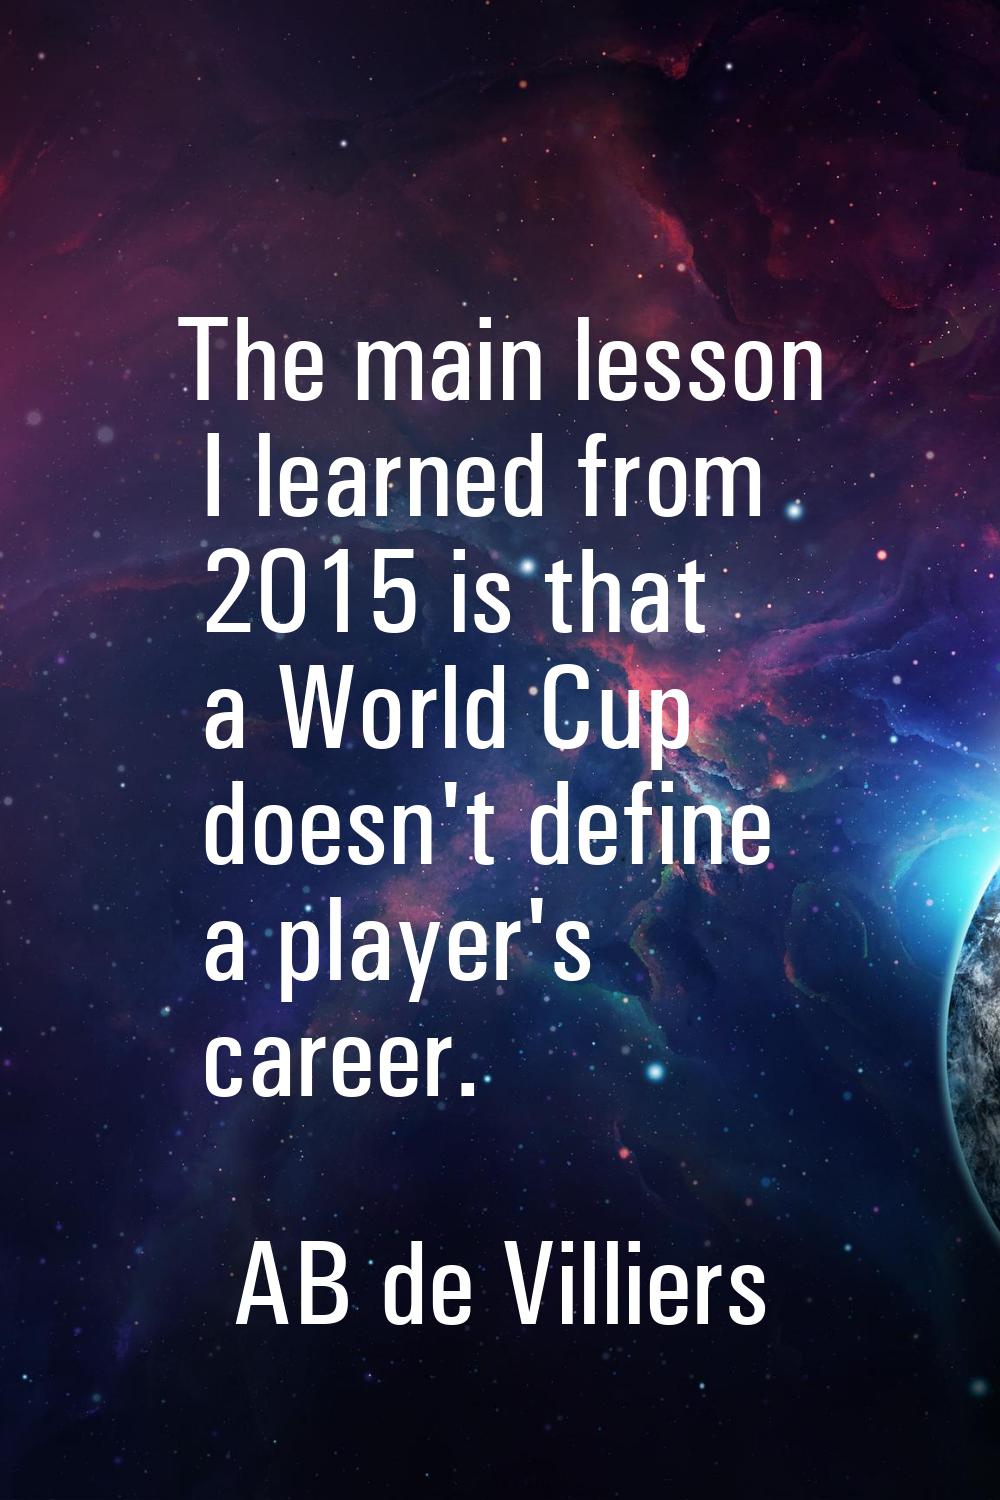 The main lesson I learned from 2015 is that a World Cup doesn't define a player's career.